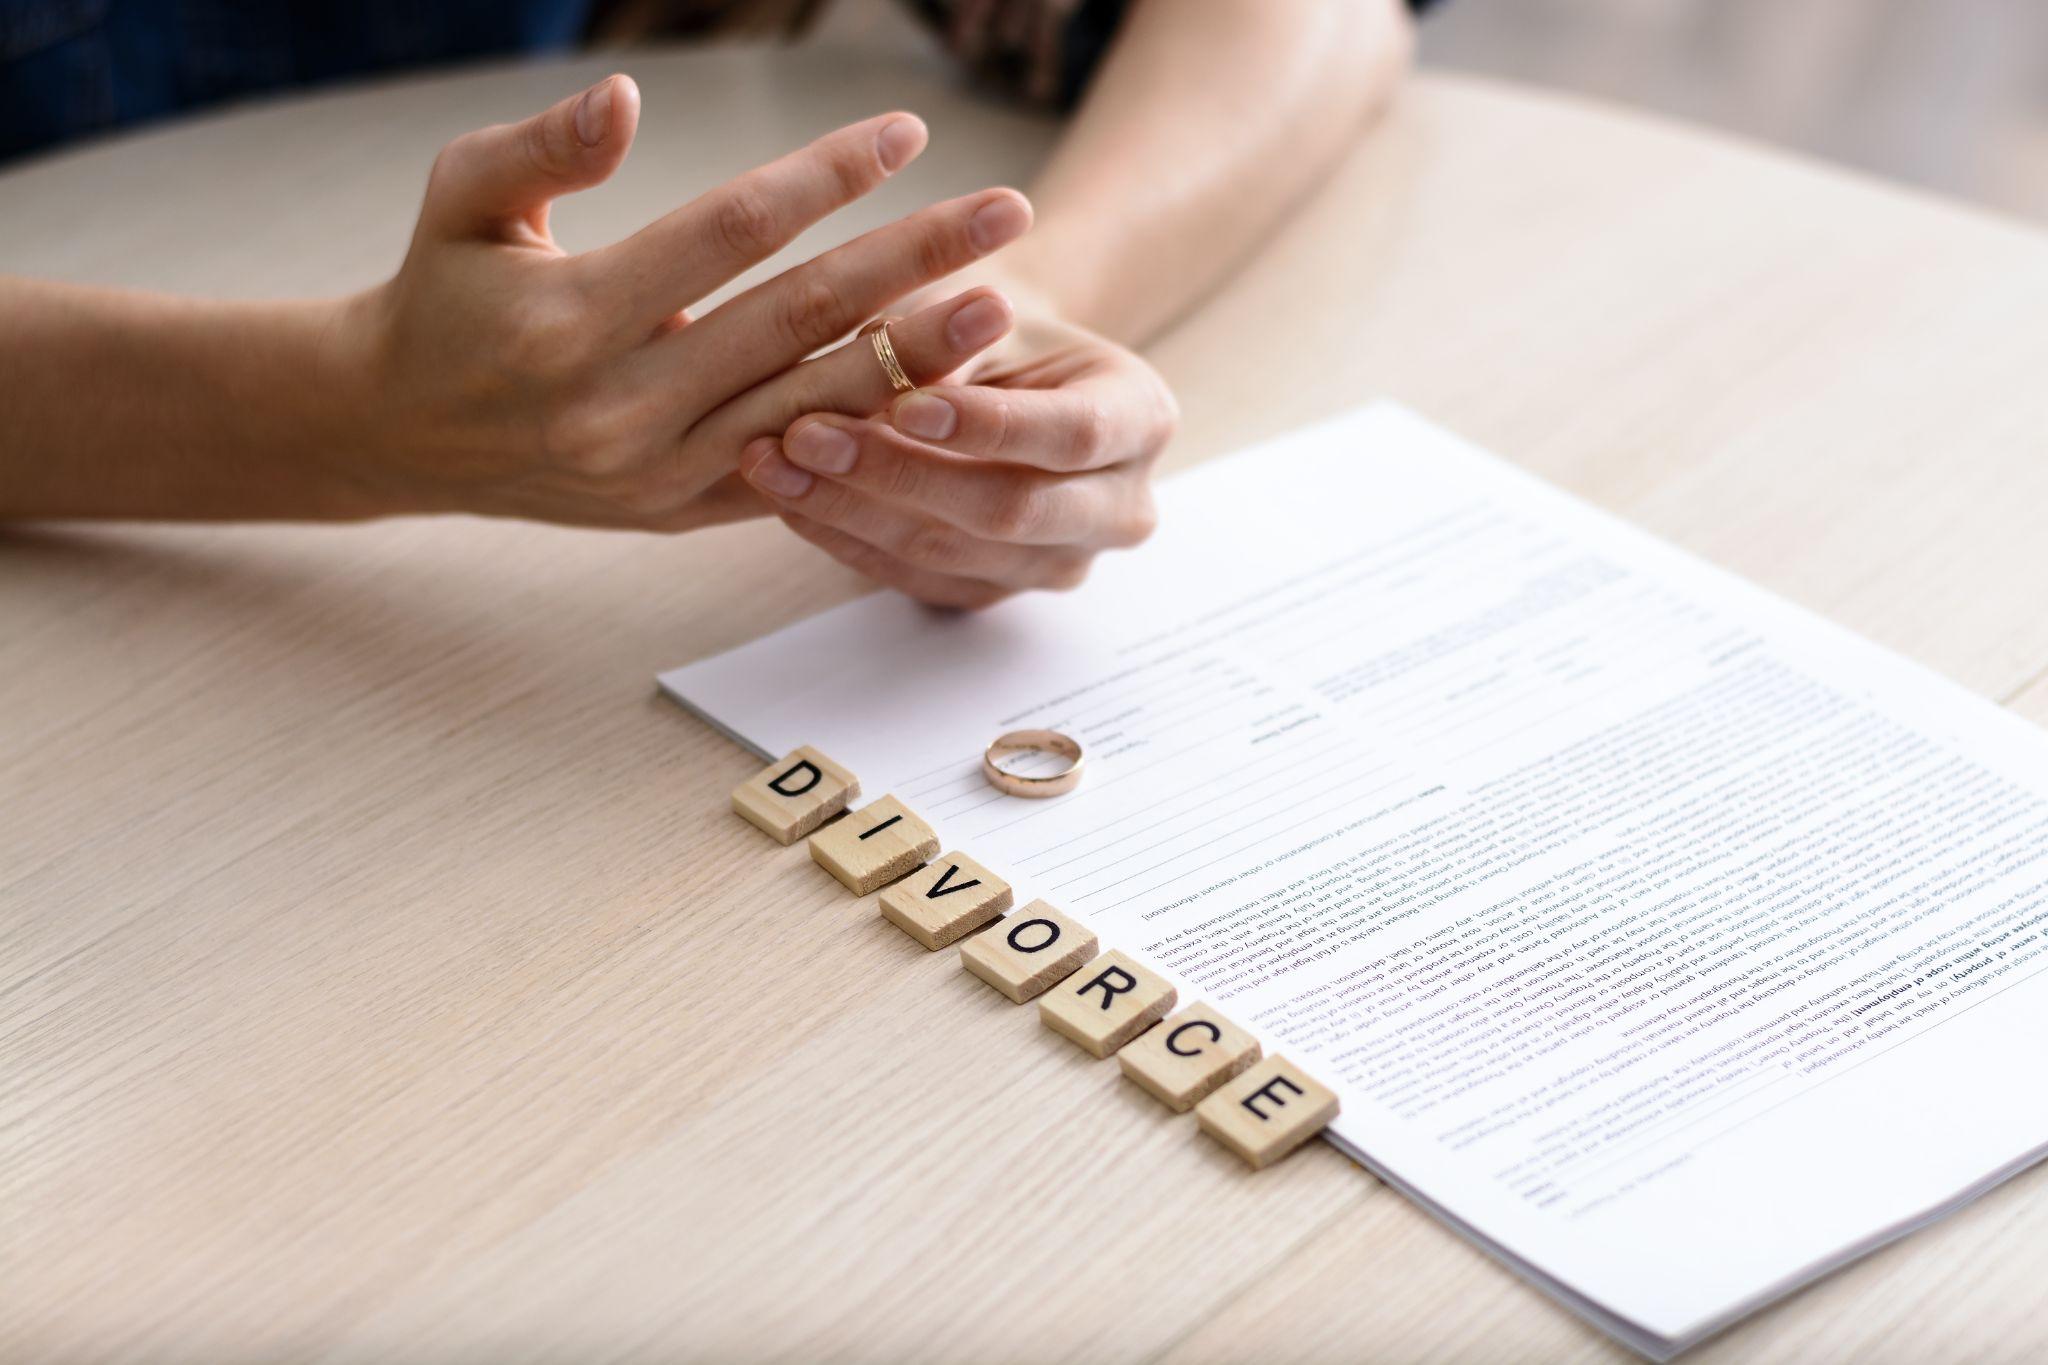 A person removing a wedding ring with the word "divorce" spelled out in tiles on a table next to a document.